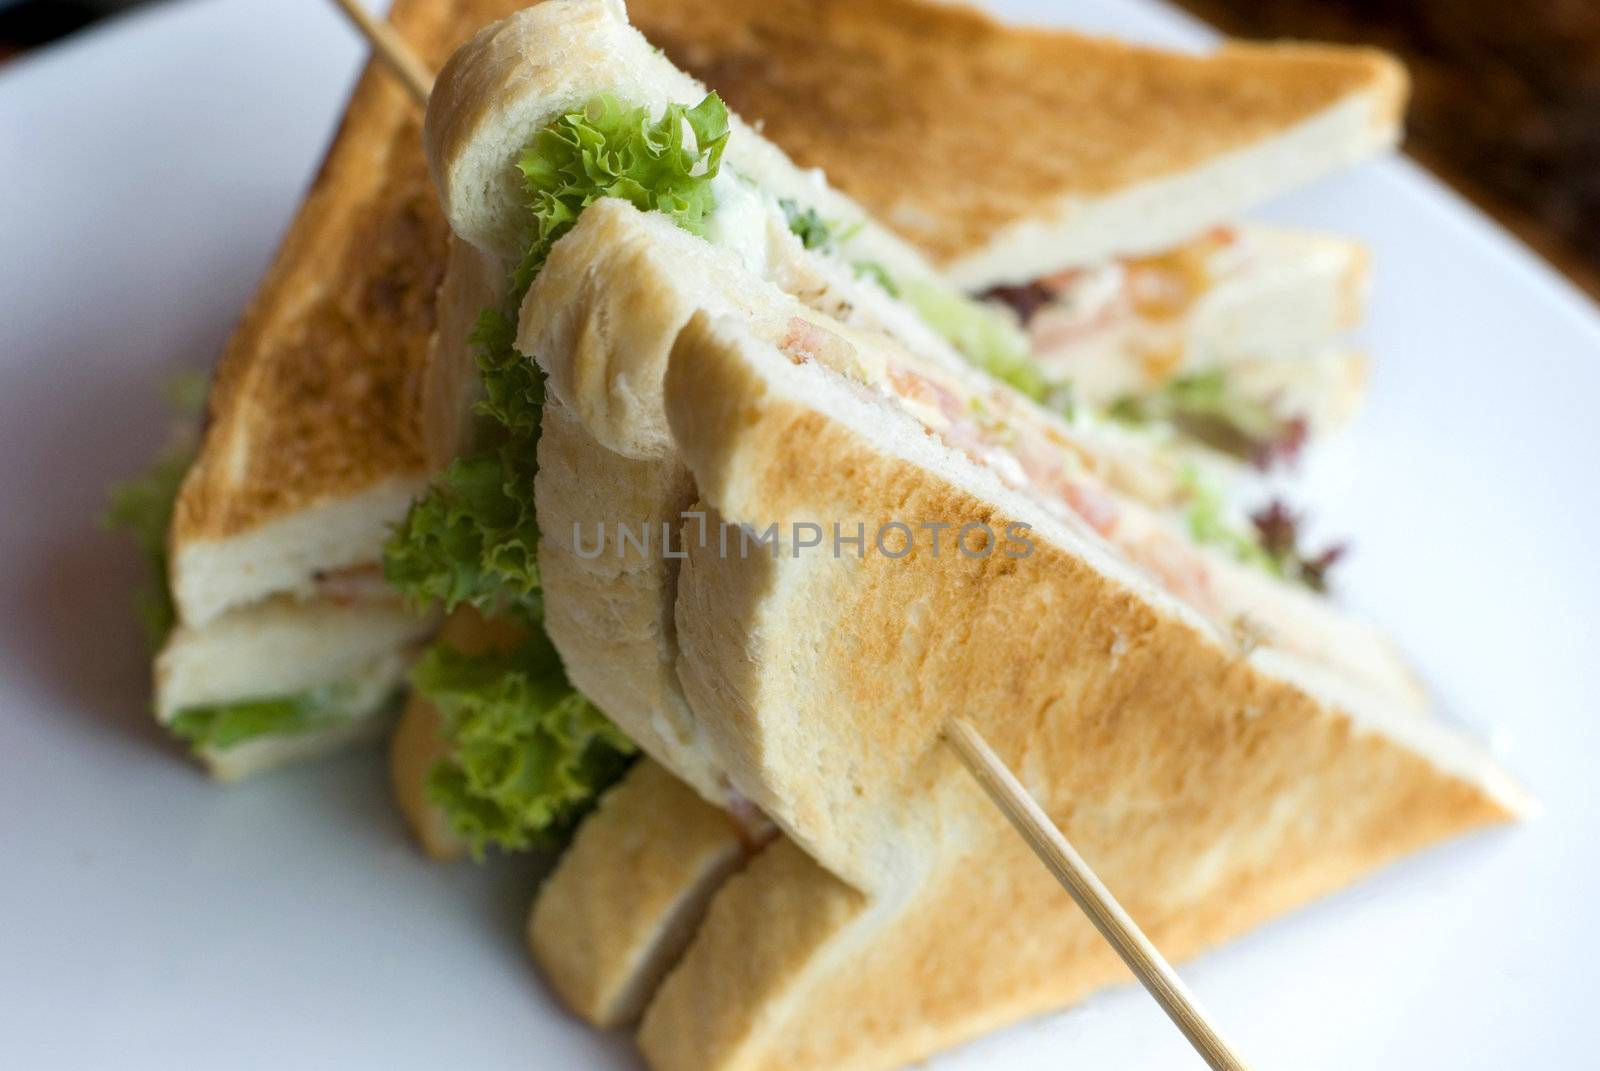 A toasted club sandwich photographed with a narrow depth of field